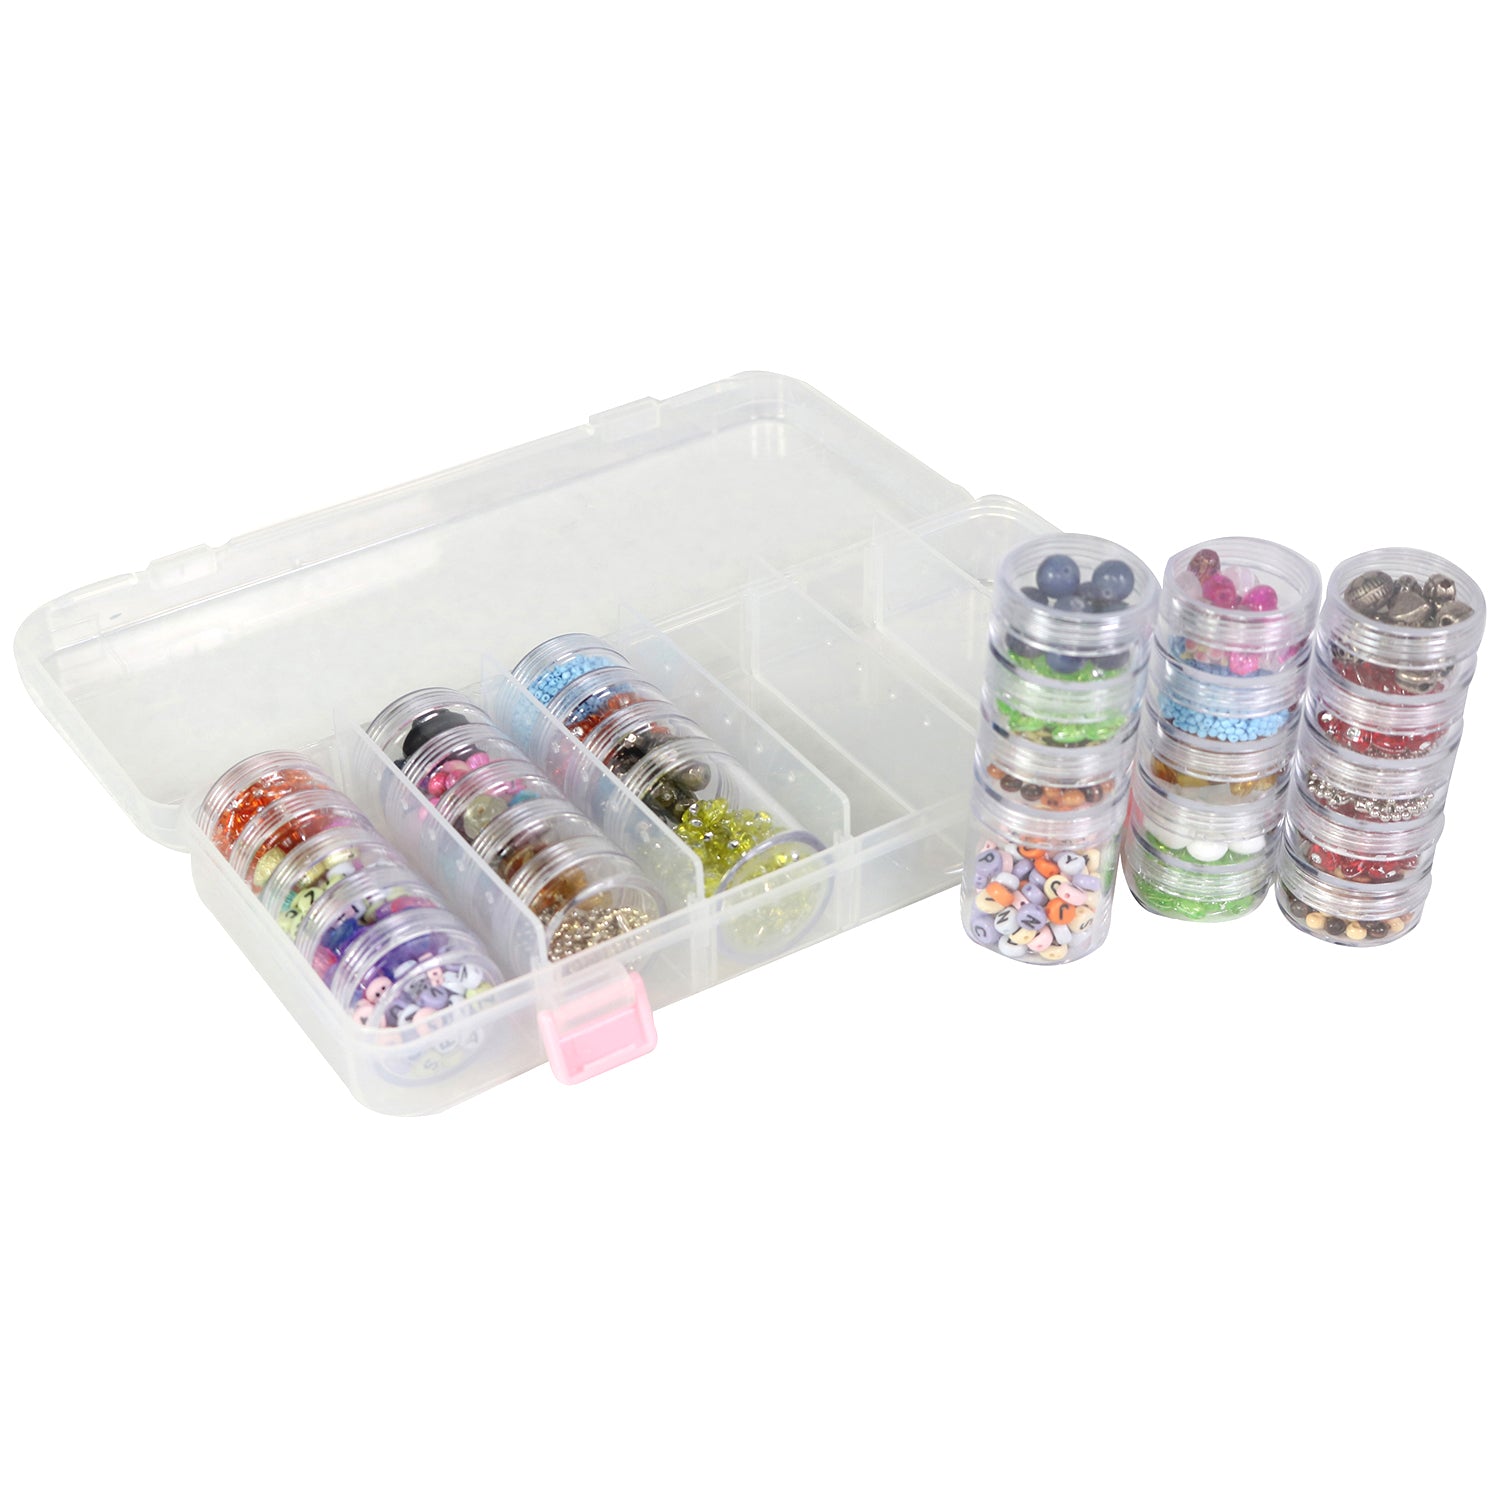 Everything Mary Large Plastic Bead Storage Organizer Box, 28 Jars -  Containers for Beads & Supplies - Organizers for Craft, Art, Painting -  Plastic